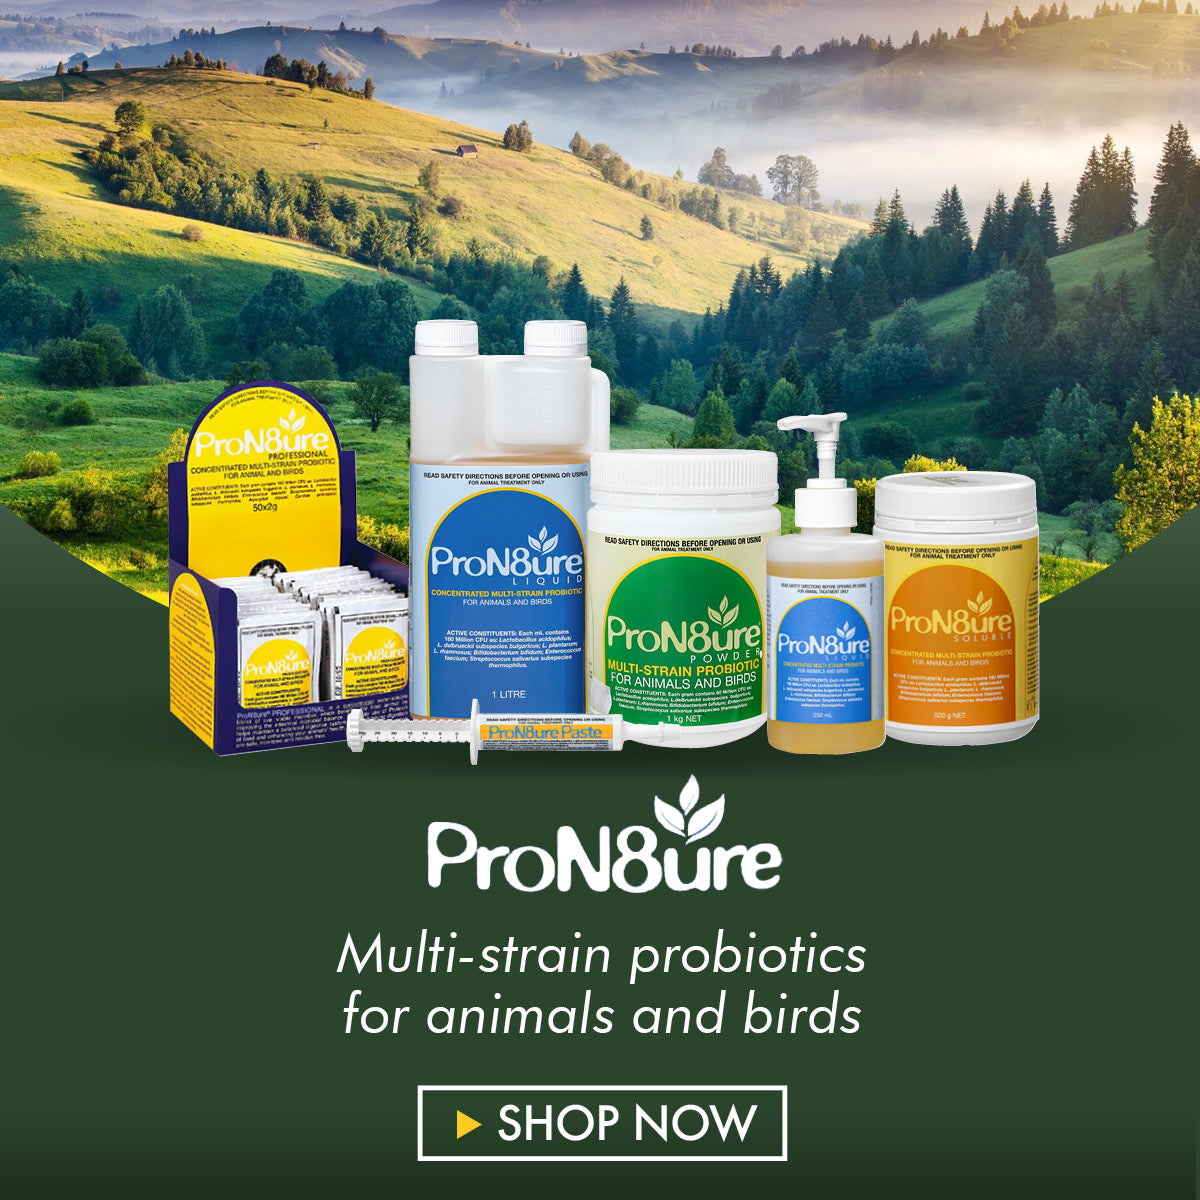 ProN8ure (formerly Protexin) Probiotic Supplements for Animals & Birds